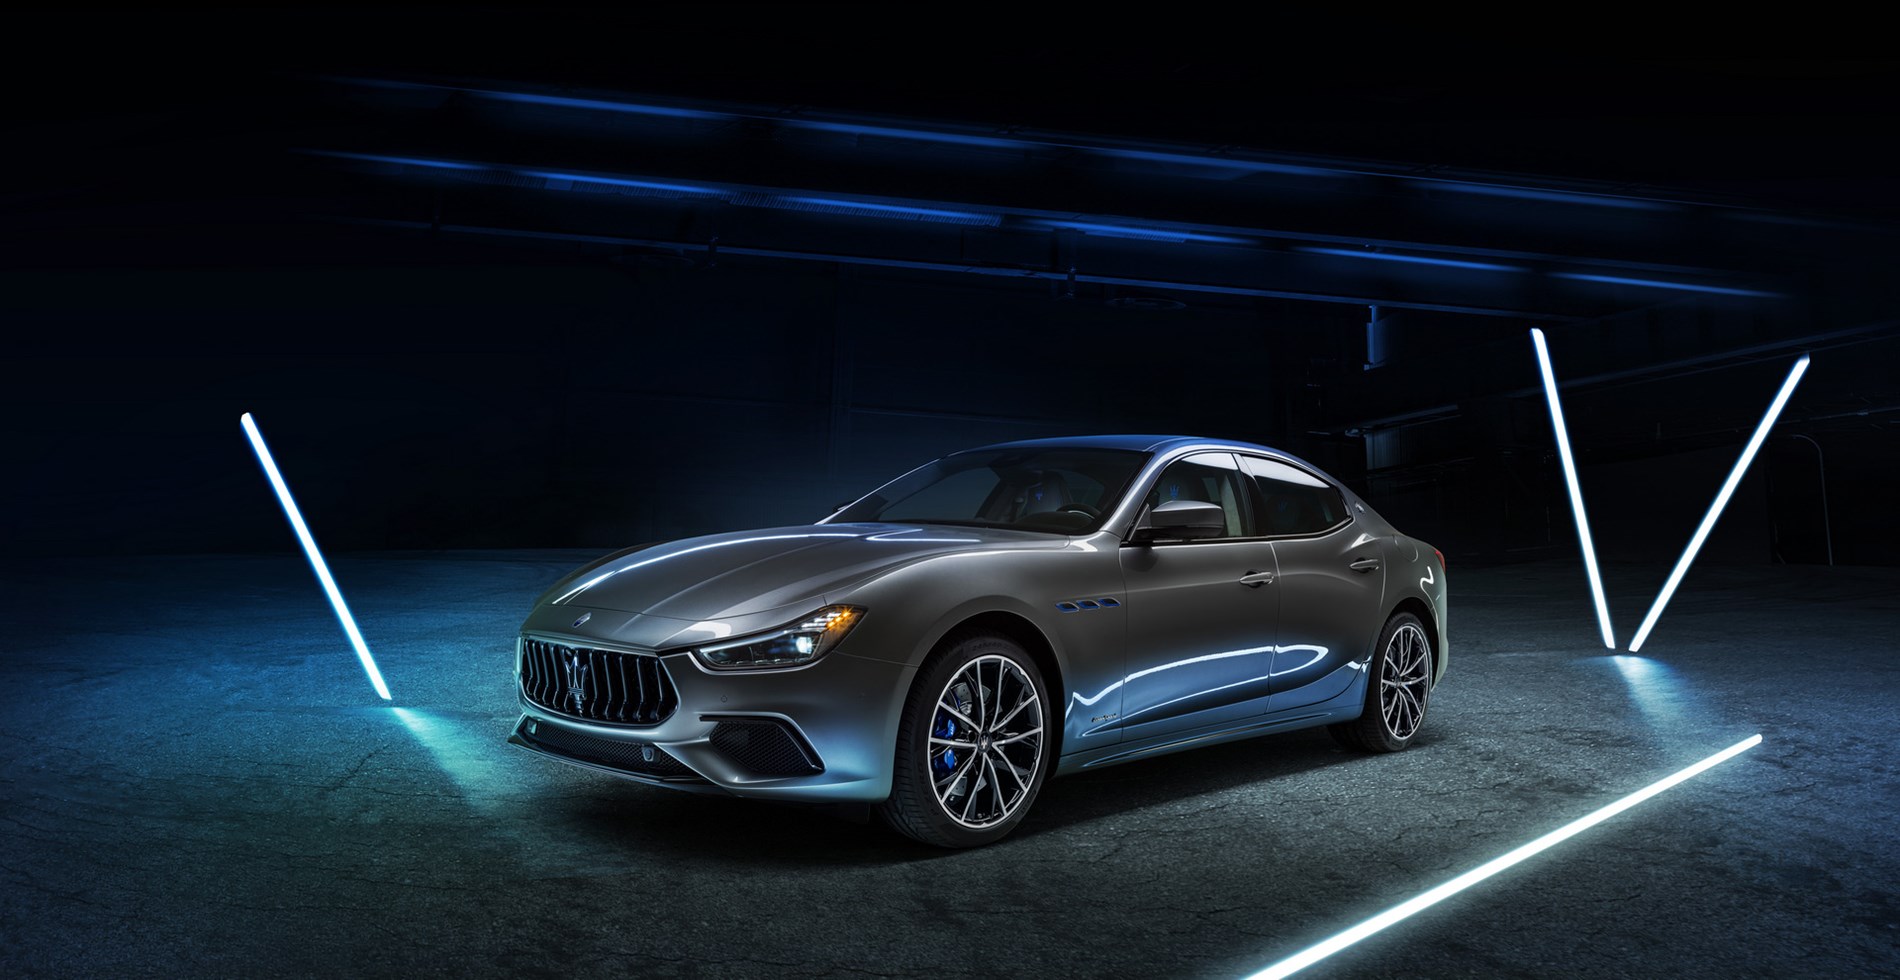 Maserati Ghibli Hybrid, the first of a new species